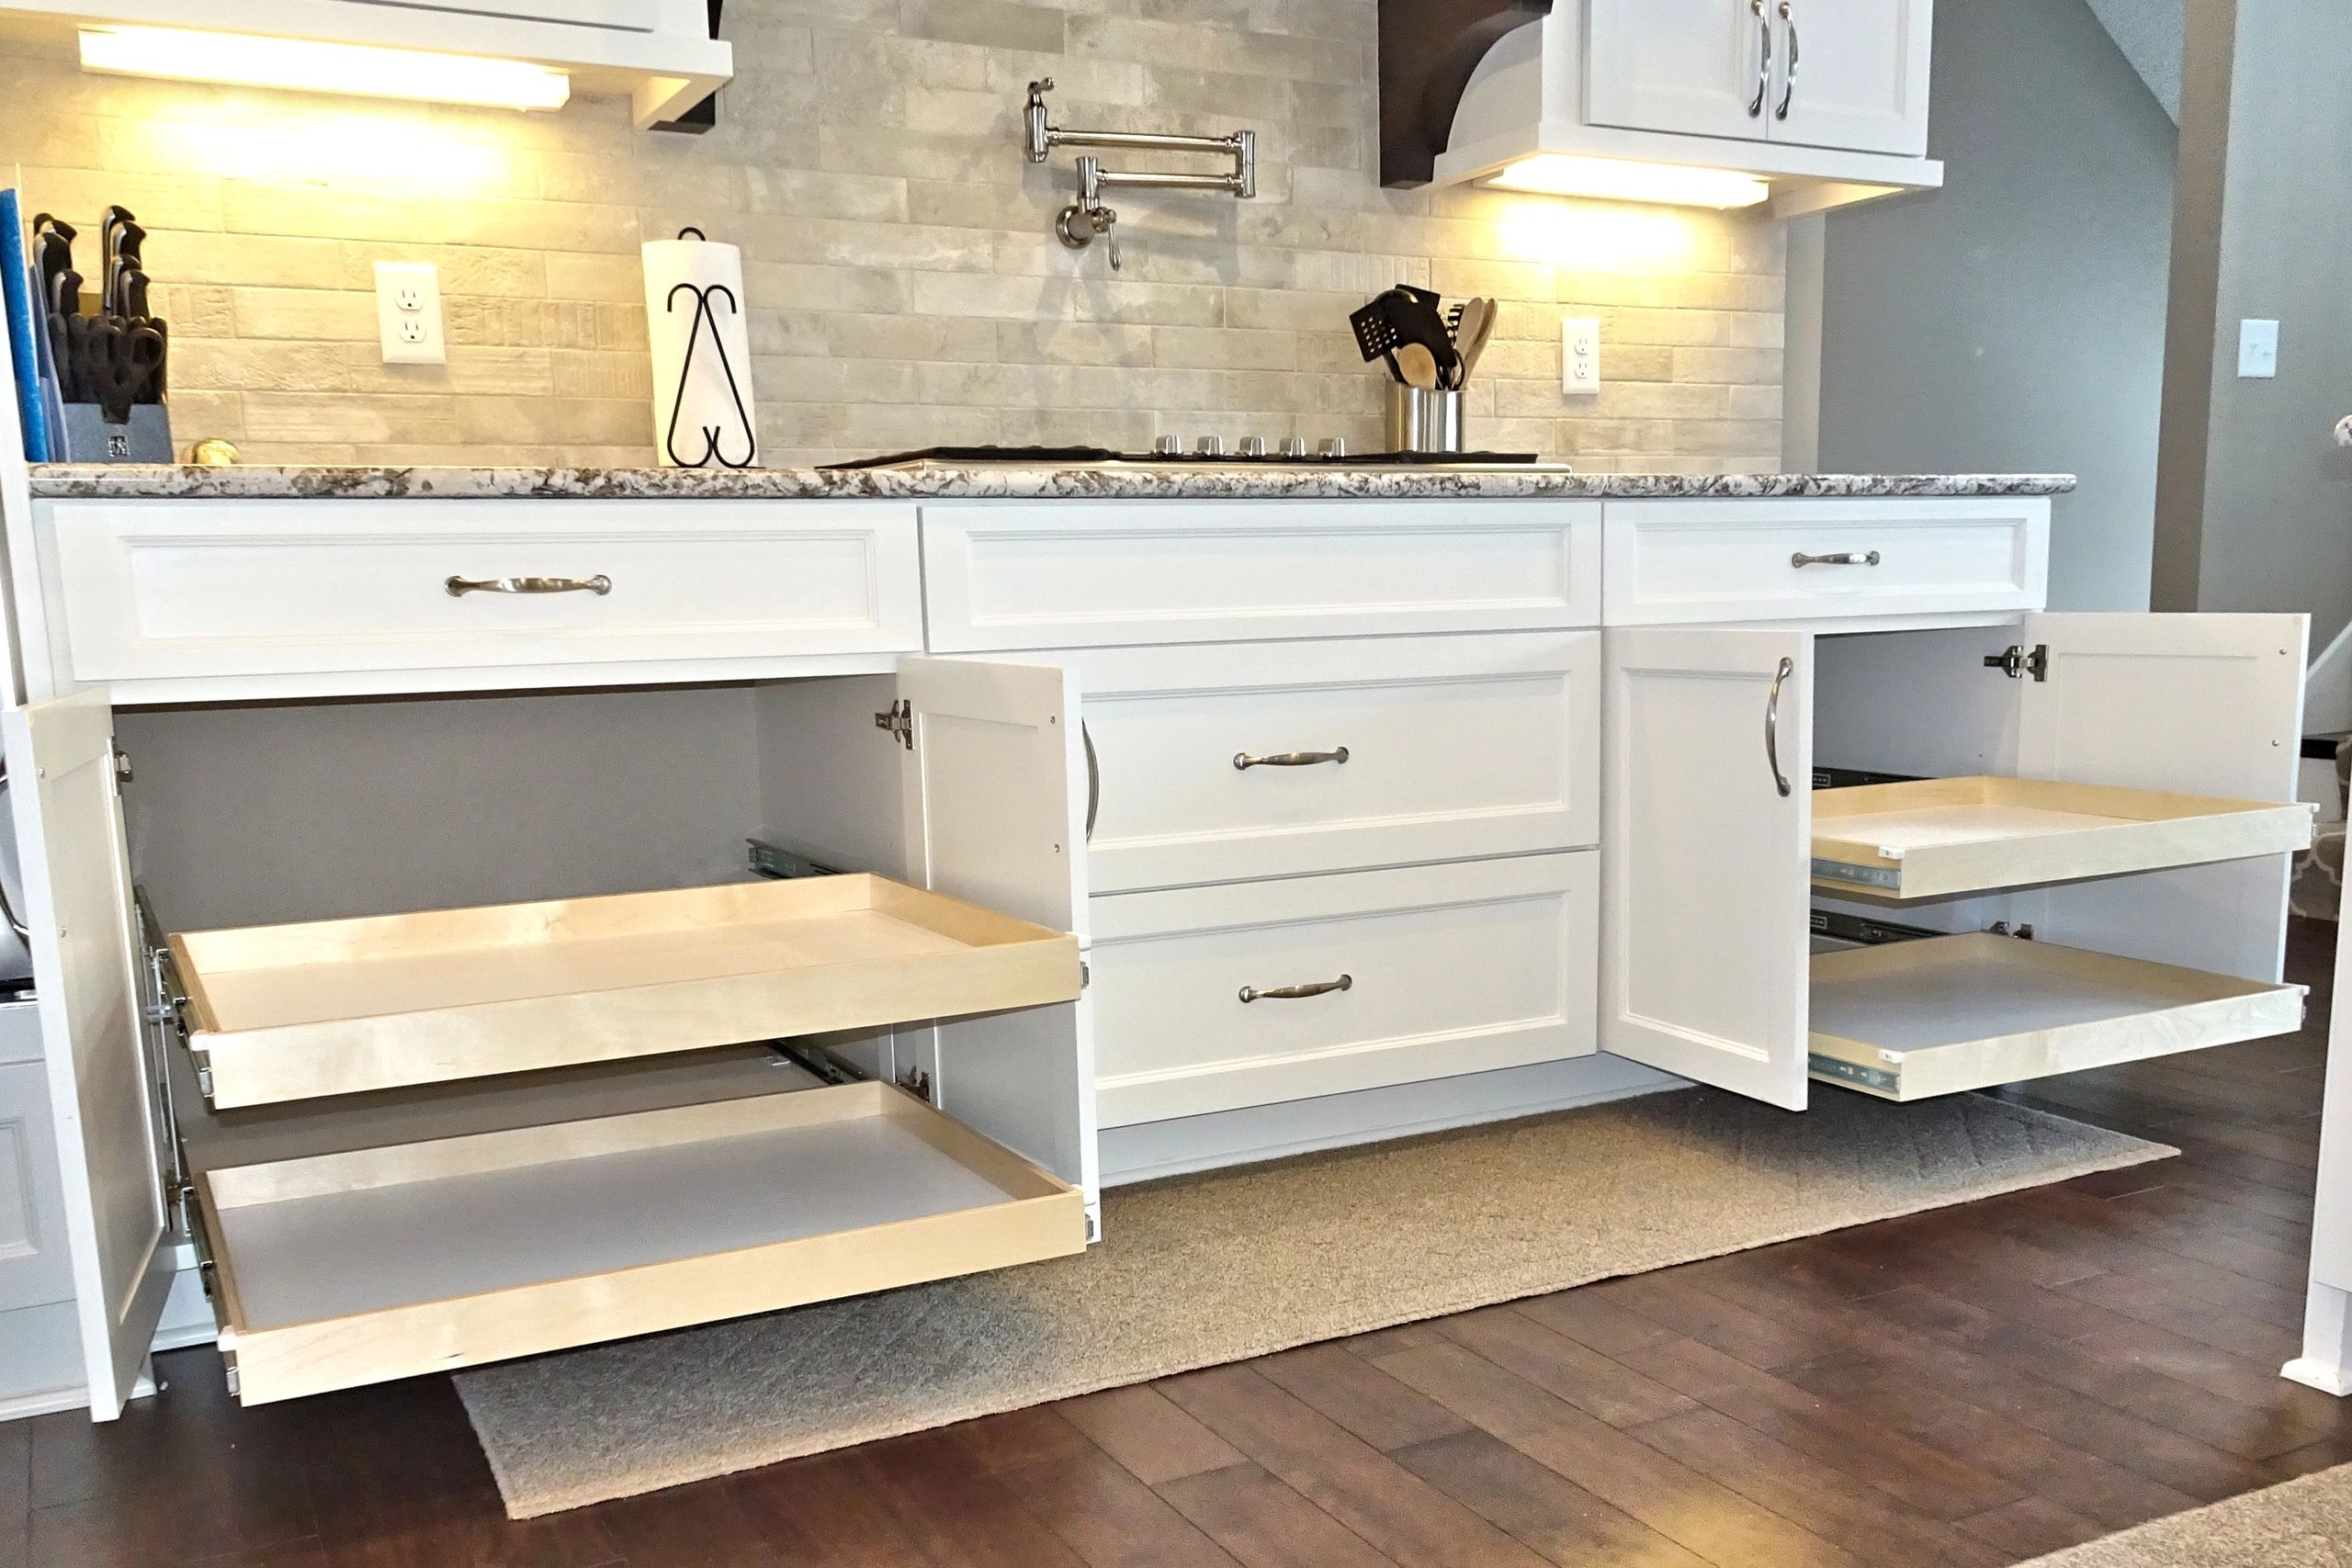 Custom Pull Out Shelves for Your Kitchen and Bathroom